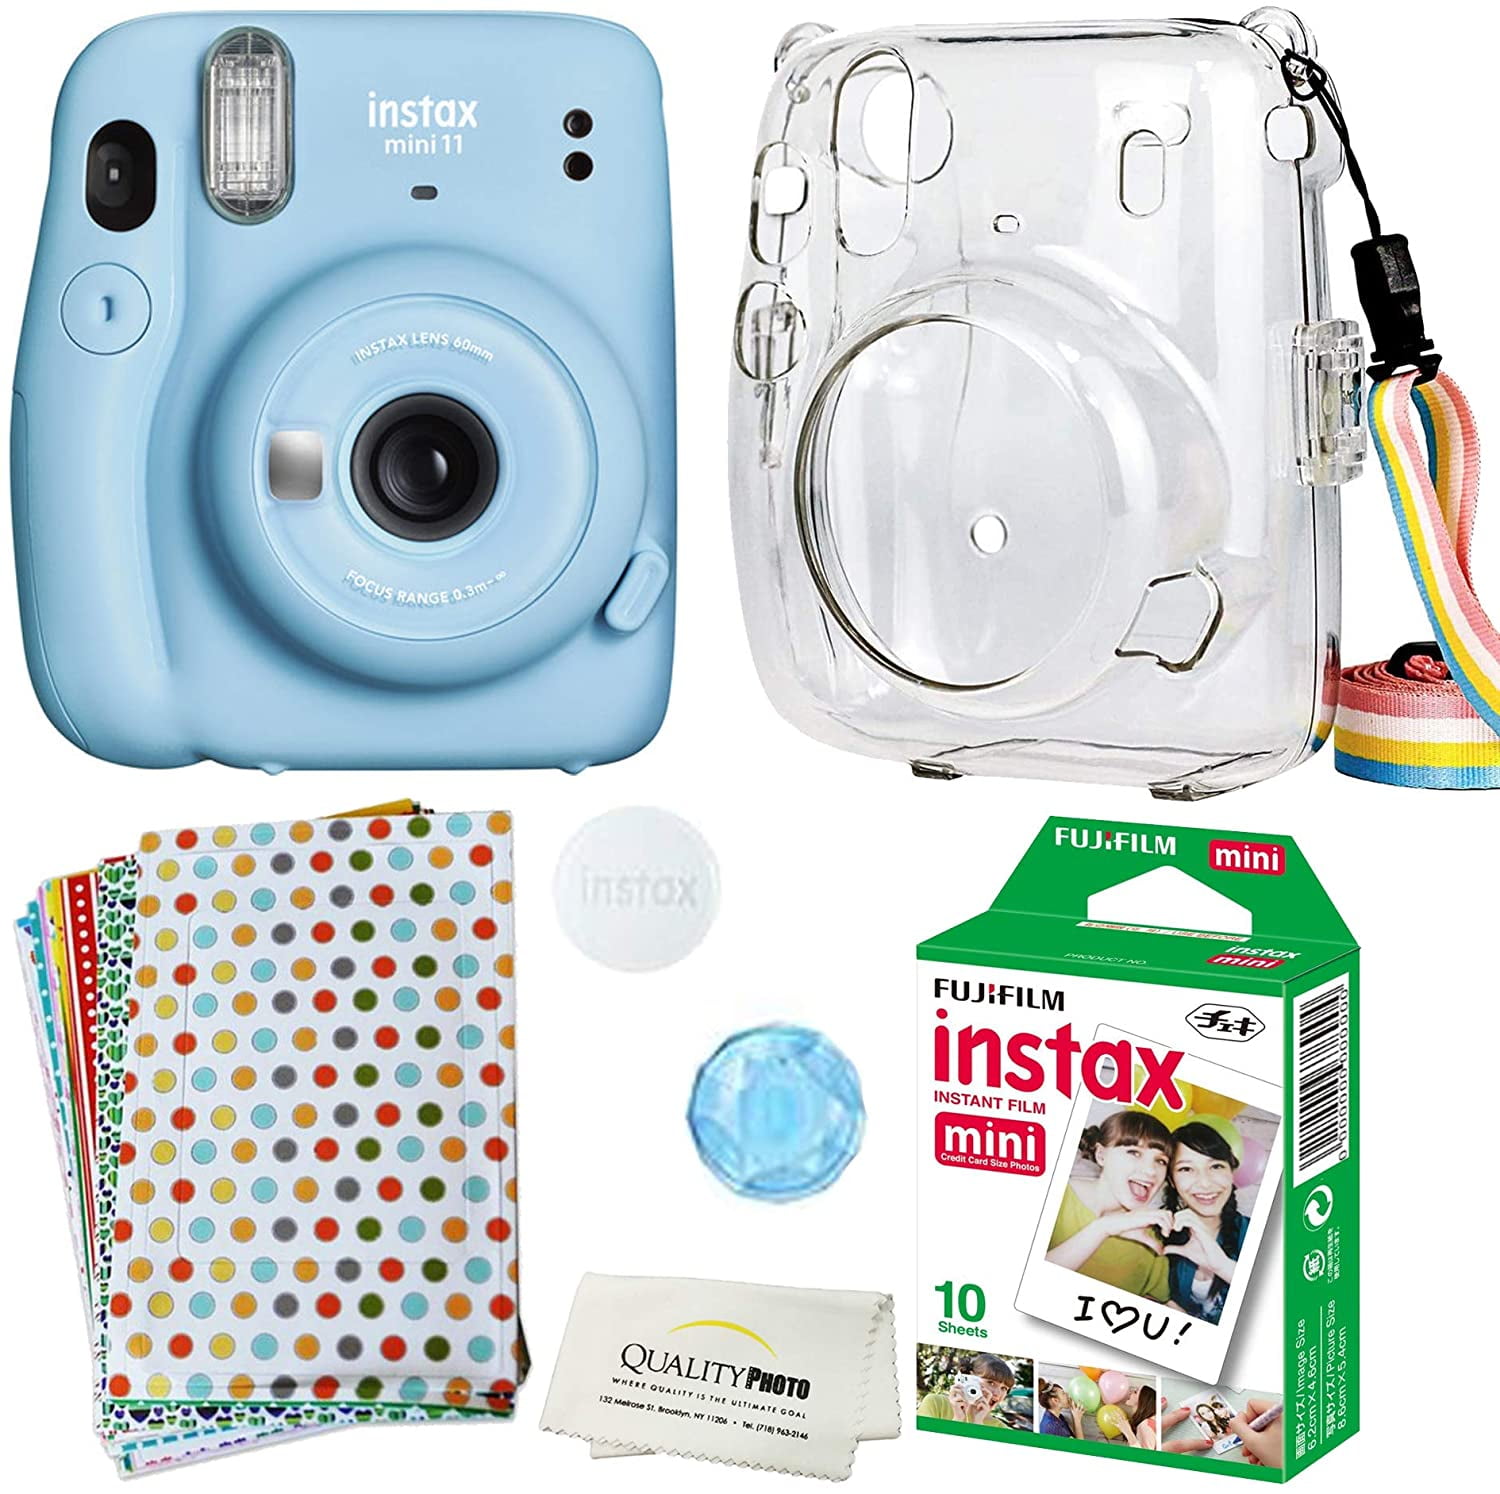 Fujifilm Instax Mini EVO Hybrid Instant Film Camera (Black) (16745183)  Bundle with 40 Instant Film Sheets + 32GB Memory Card + Small Padded Case +  SD Card Reader + MicroFiber Cleaning Cloth 